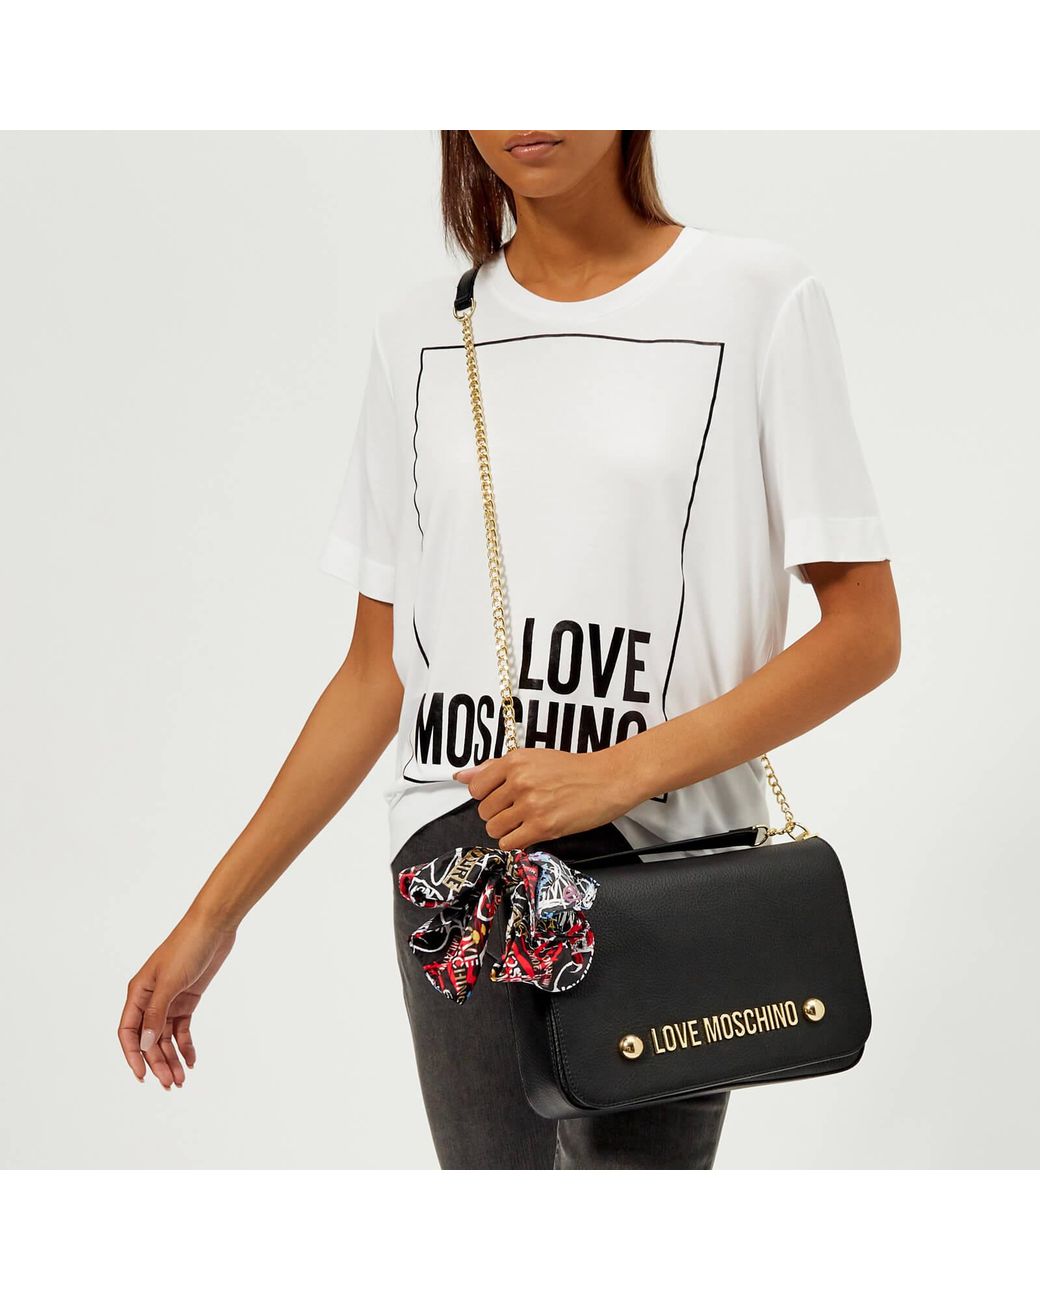 Love Moschino | Bags, Trainers, Purses & More | Flannels